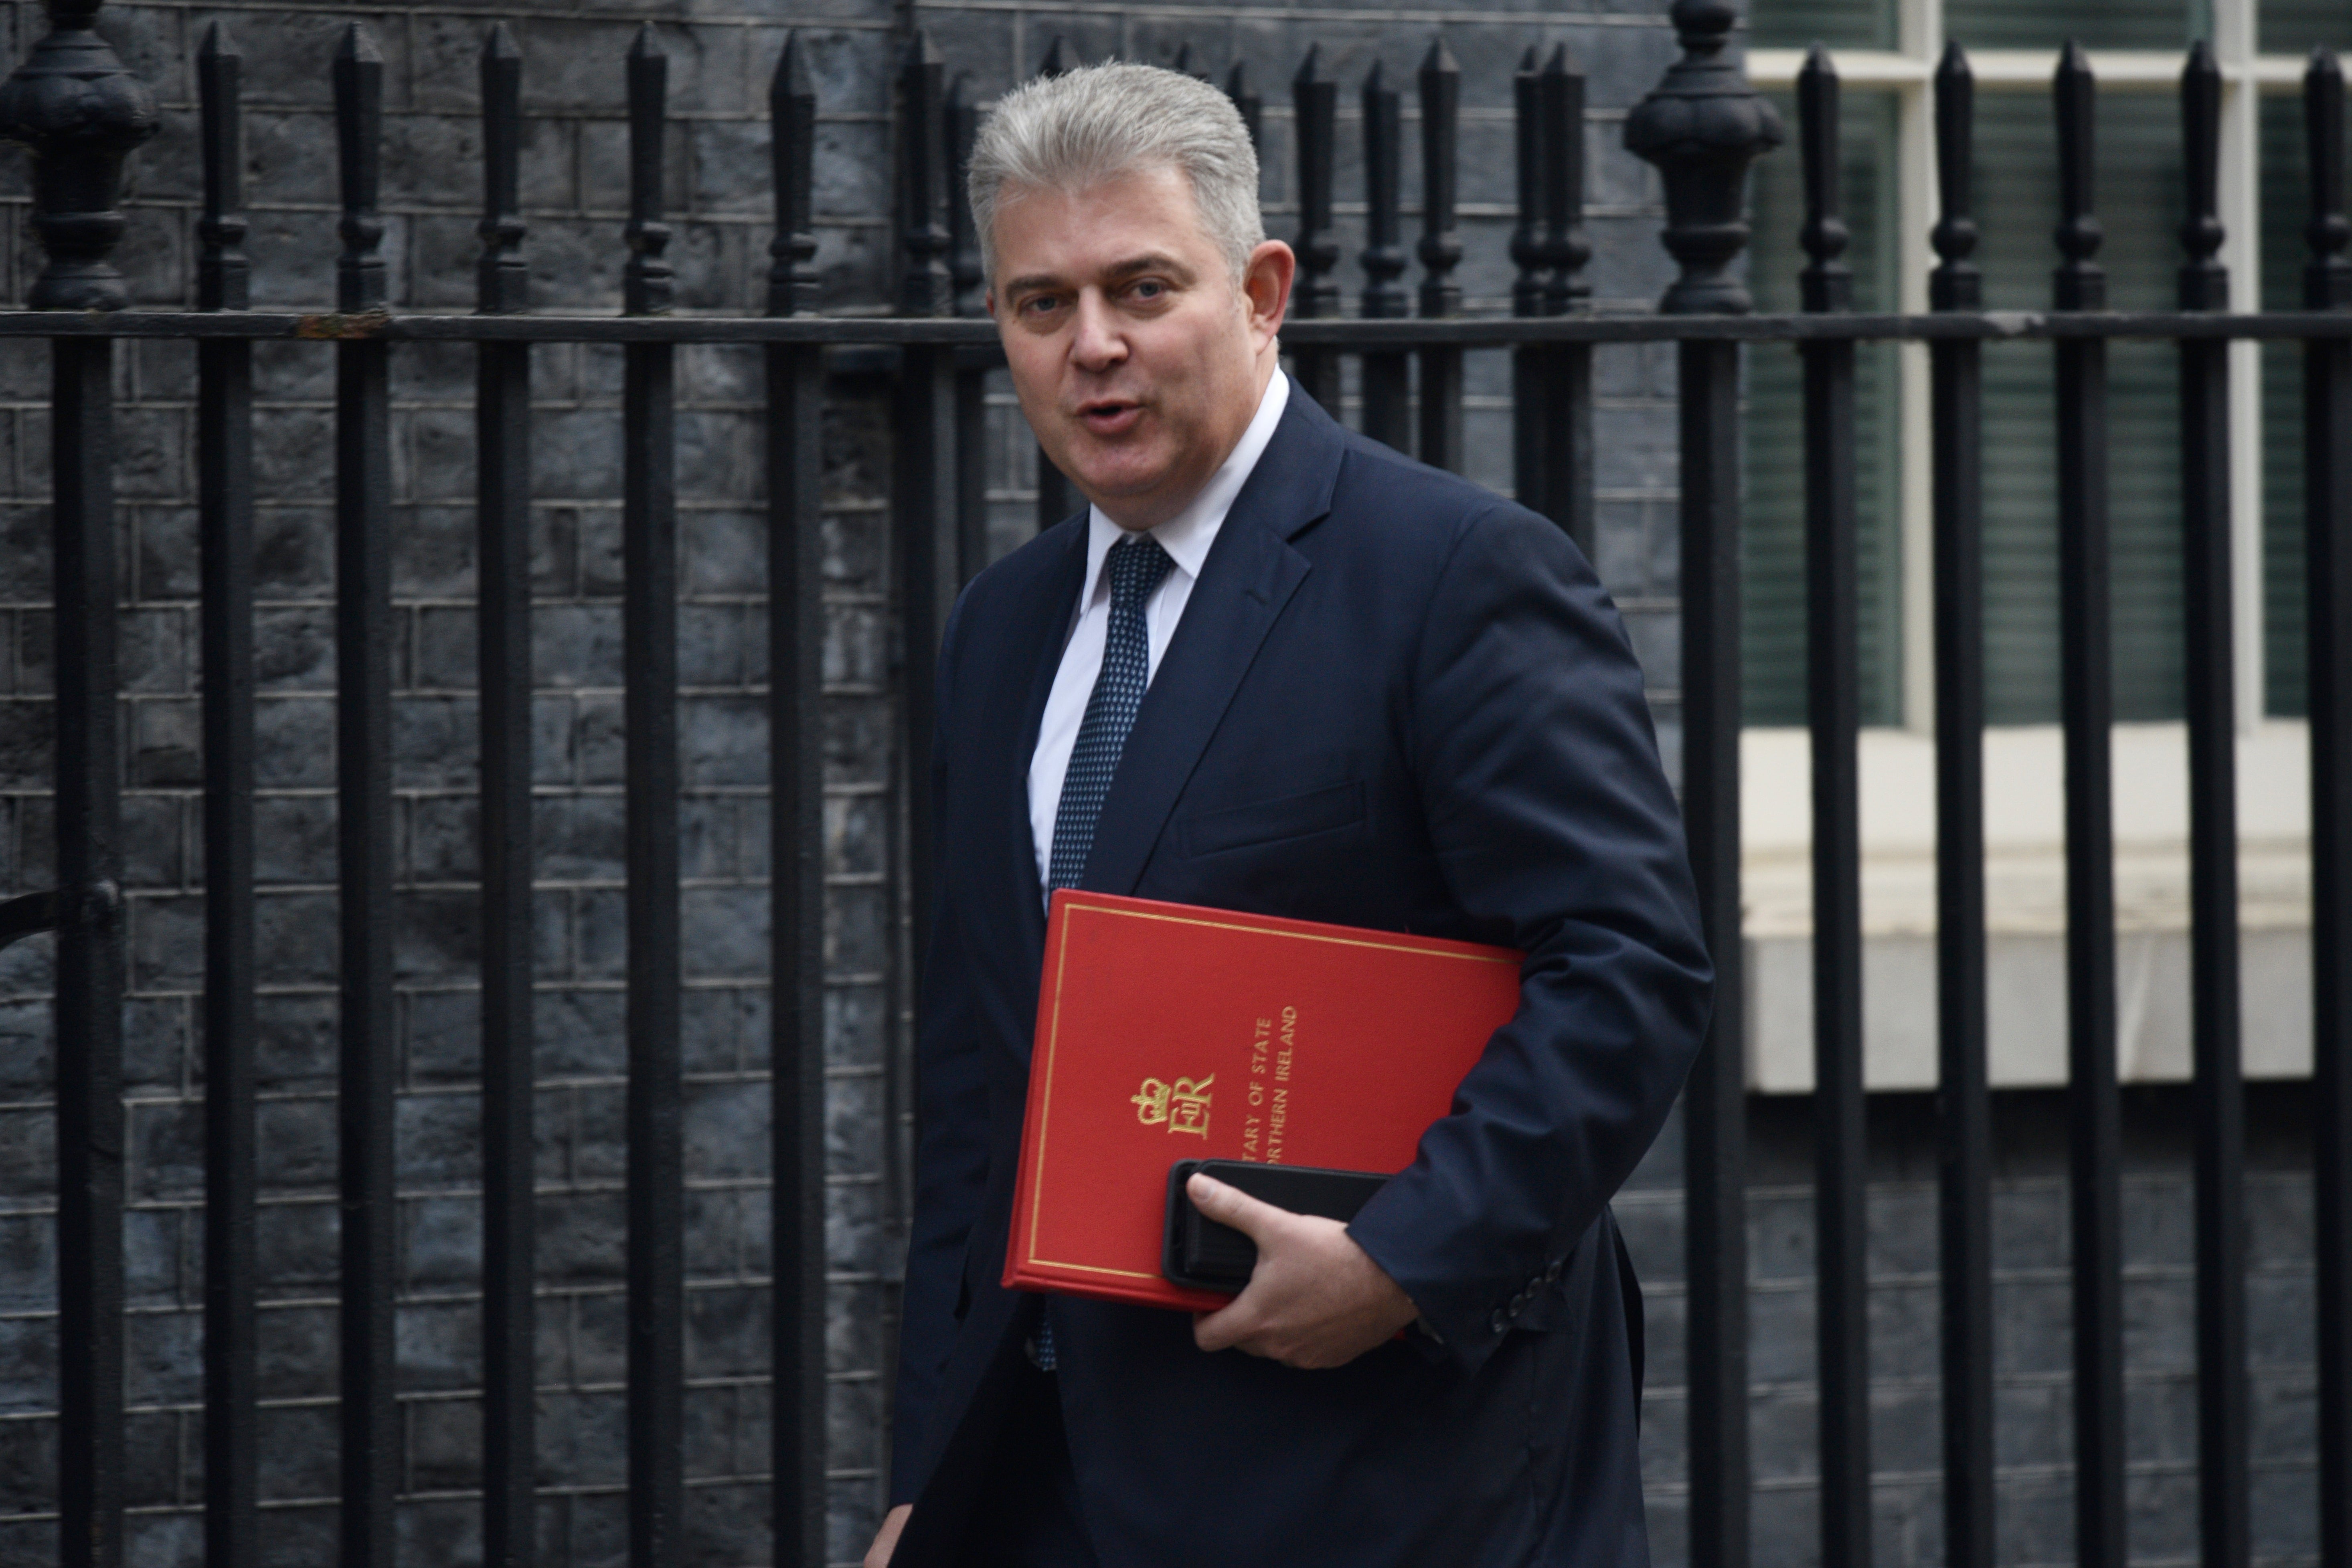 Northern Ireland secretary Brandon Lewis failed to comply with his duties by not expeditiously ensuring provision for full abortion services